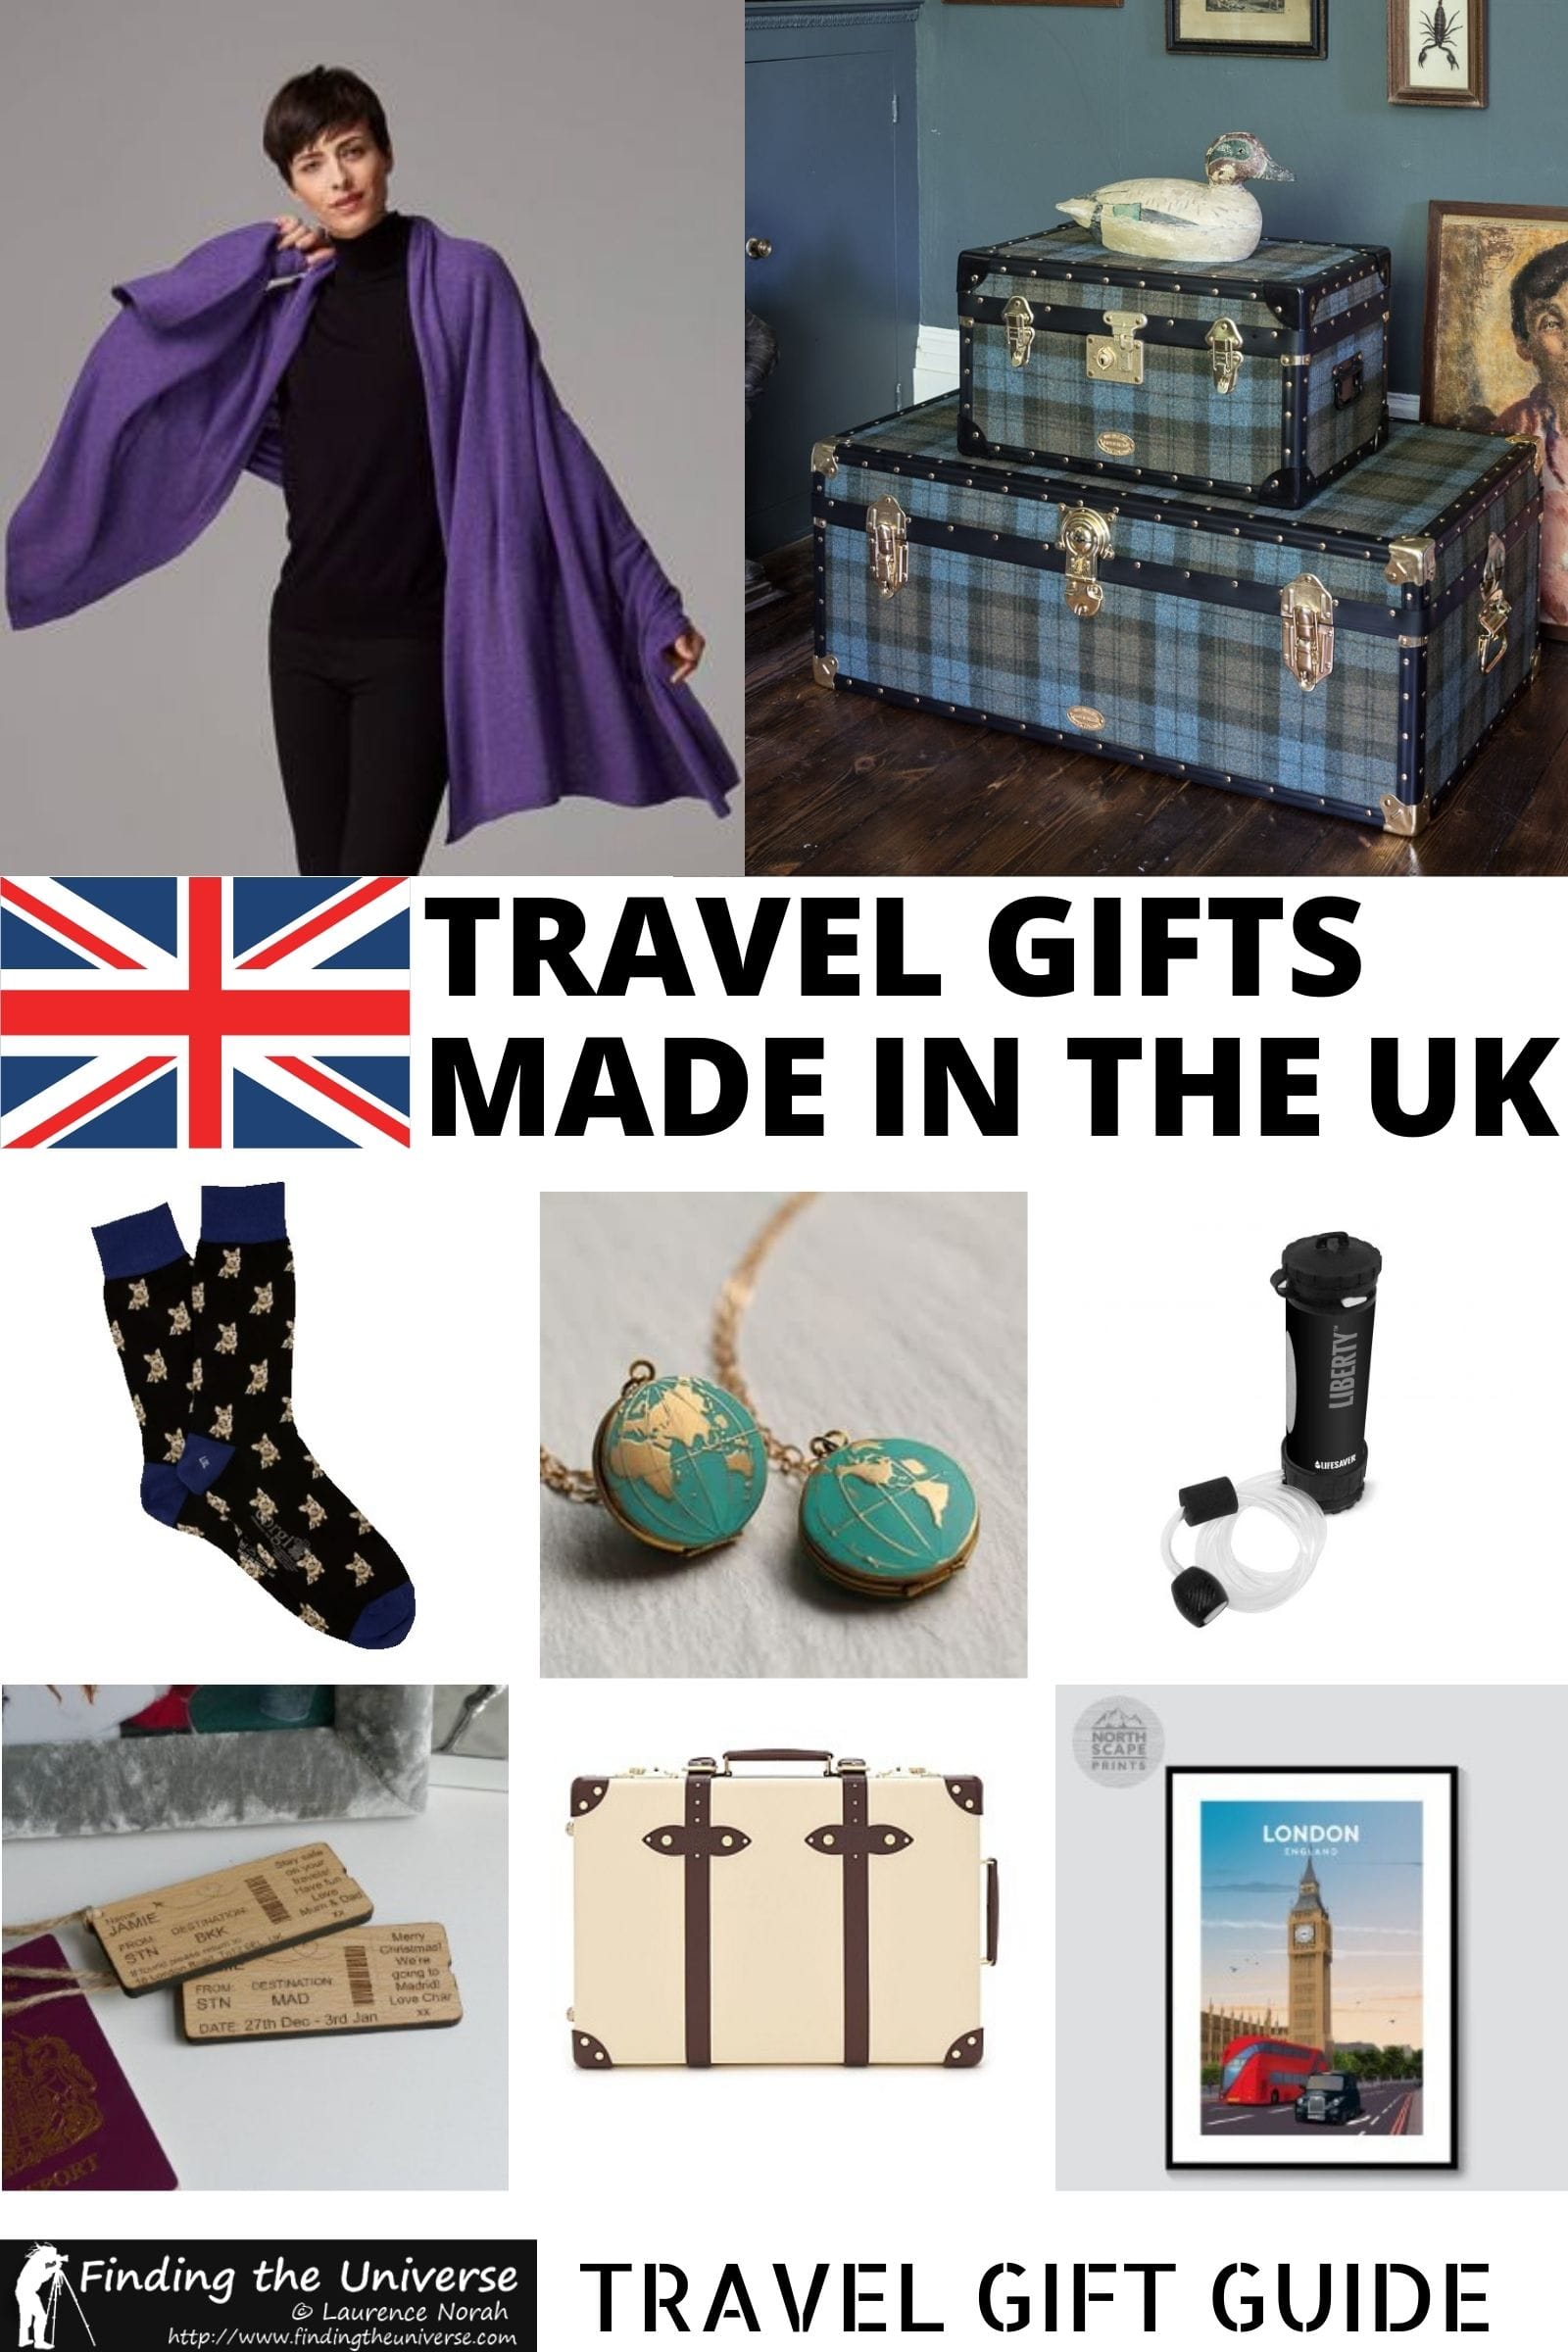 Looking for gifts made in Britain for a travel lover? This guide has some of the best gifts made in the UK at a range of budgets!